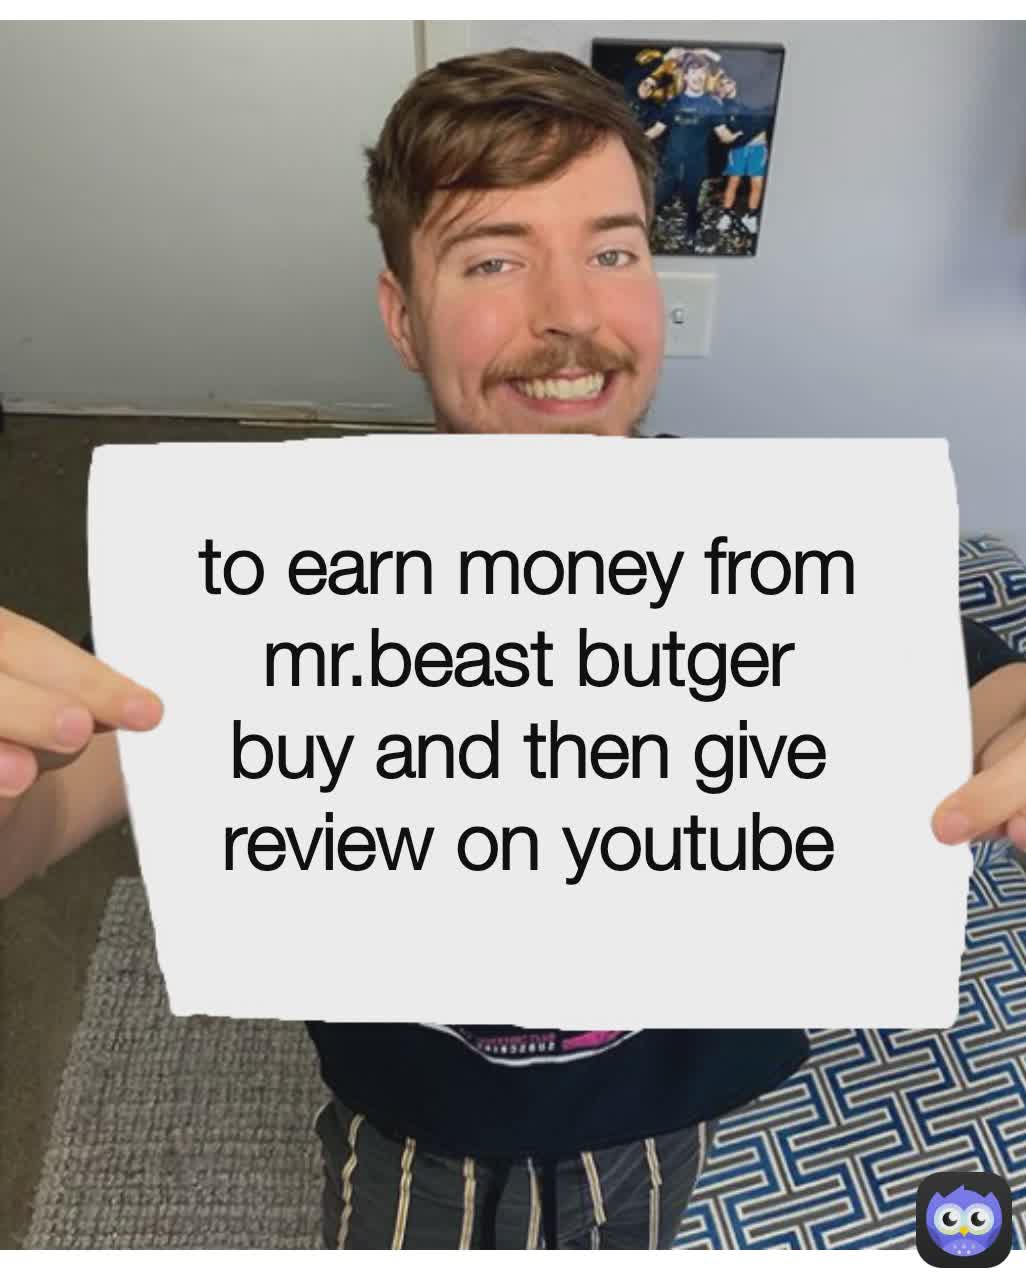 To earn money from Mr.Beasylt burger buy it and then give it's review on youtube to earn money from mr.beast butger buy and then give review on youtube